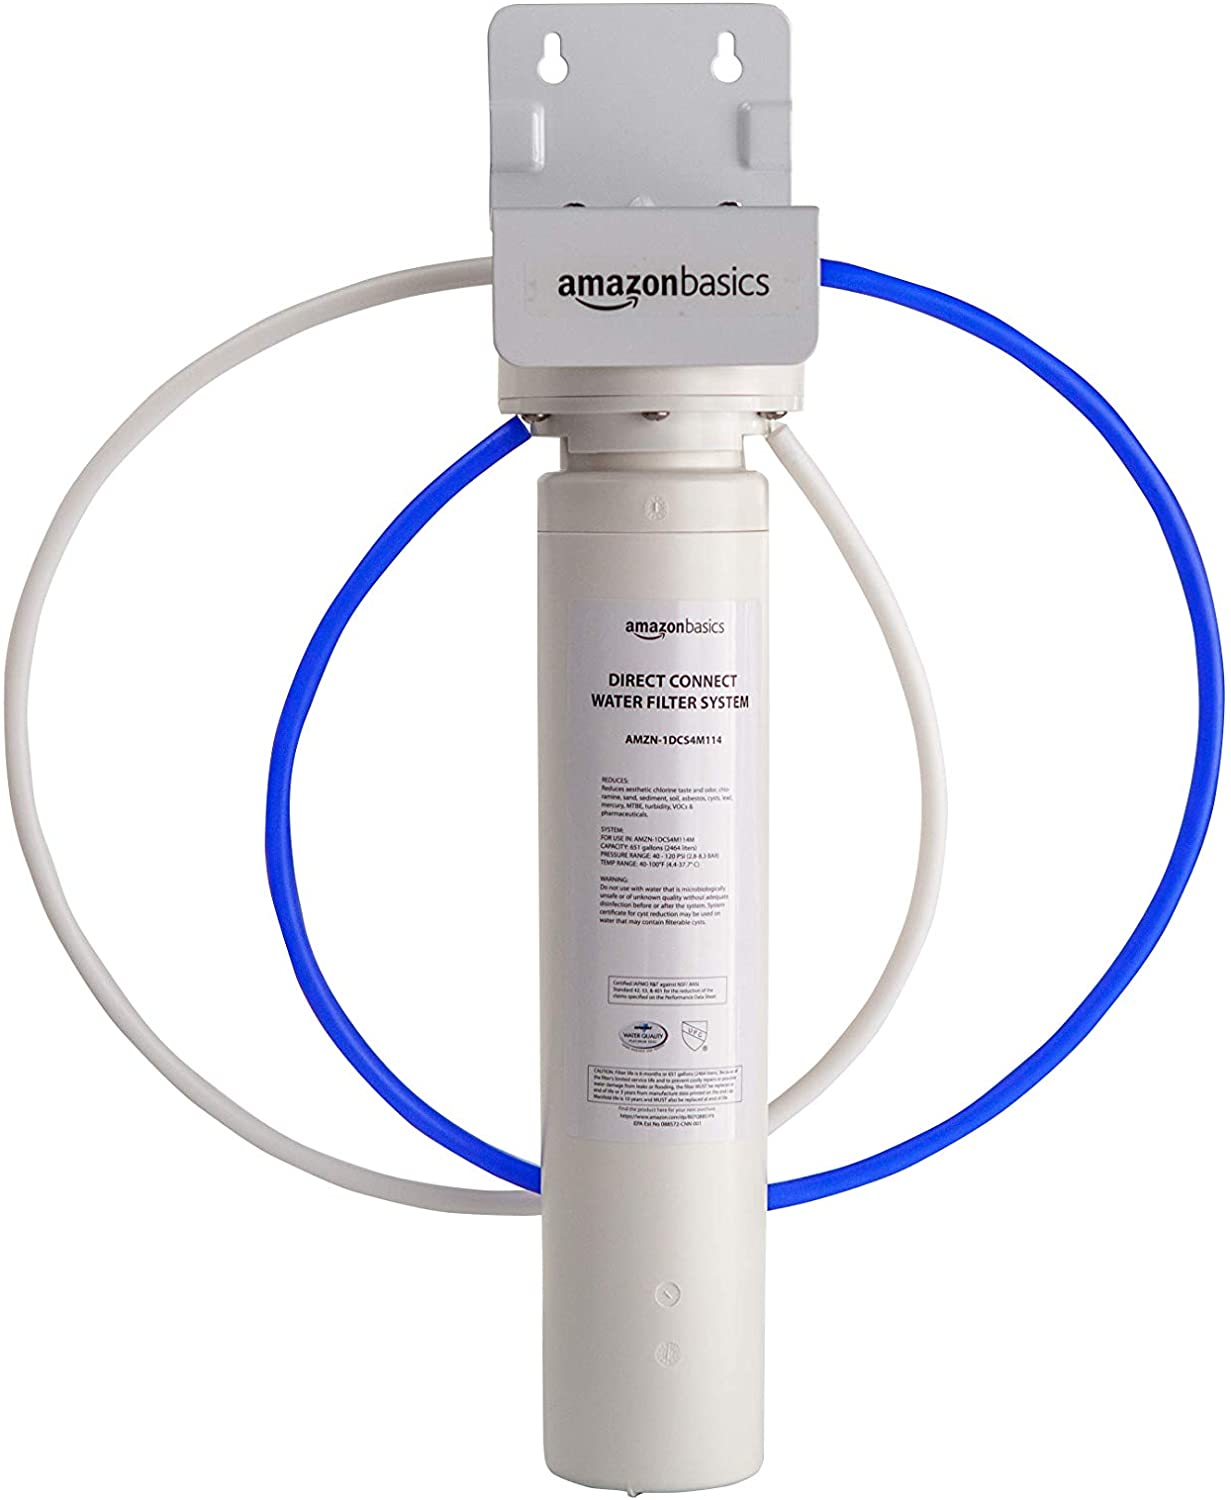 AmazonBasics AMZN-PB-1DCS4M114M Direct Connect Full Flow High Capacity System Under Counter Water Filter, White